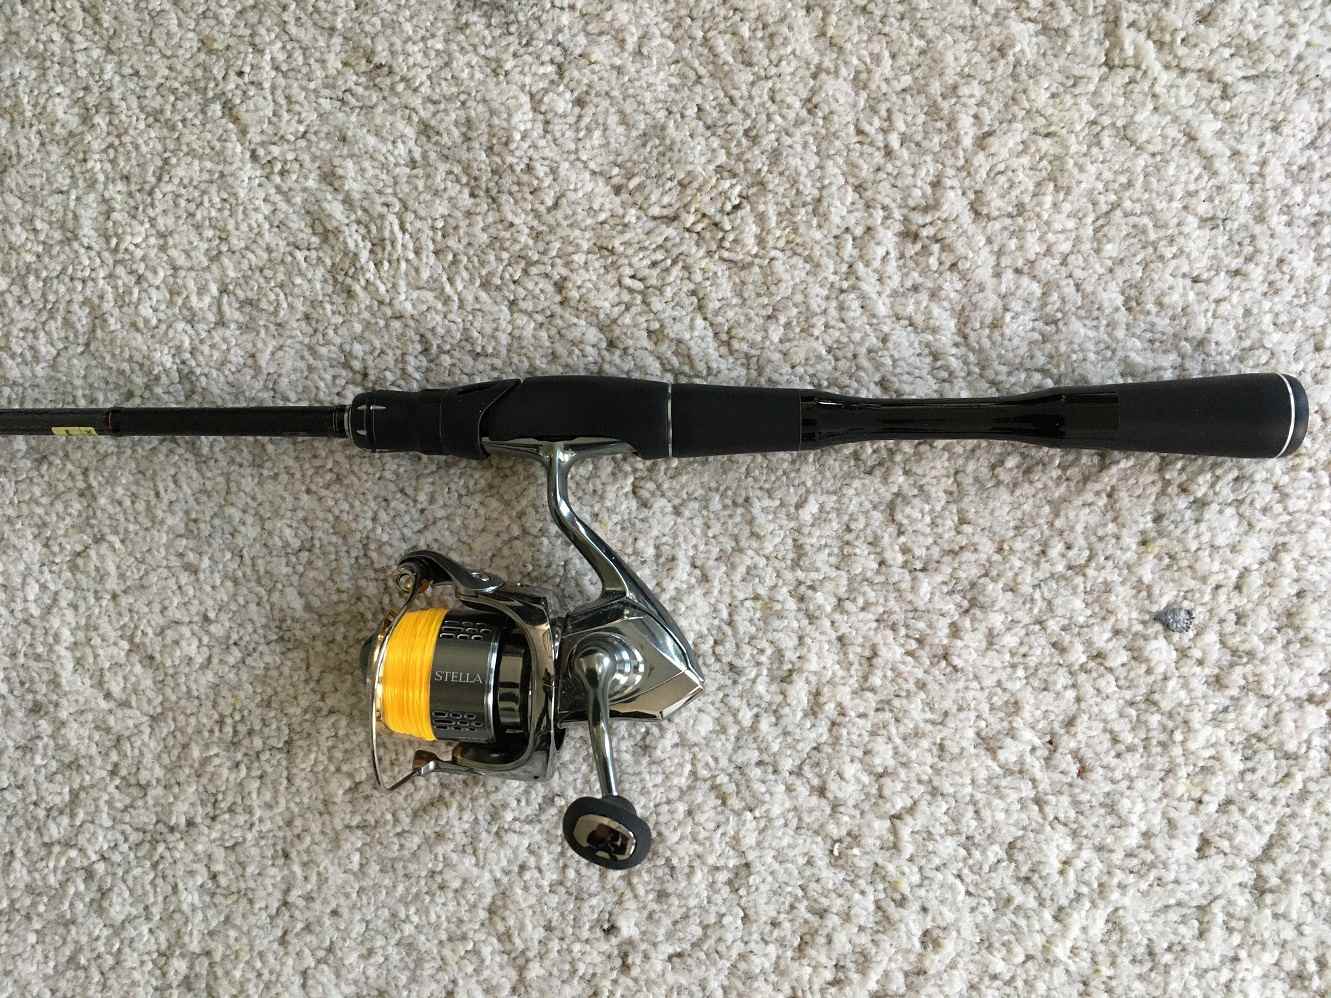 Rod for my Steez ct sv tw 70 ? - Fishing Rods, Reels, Line, and